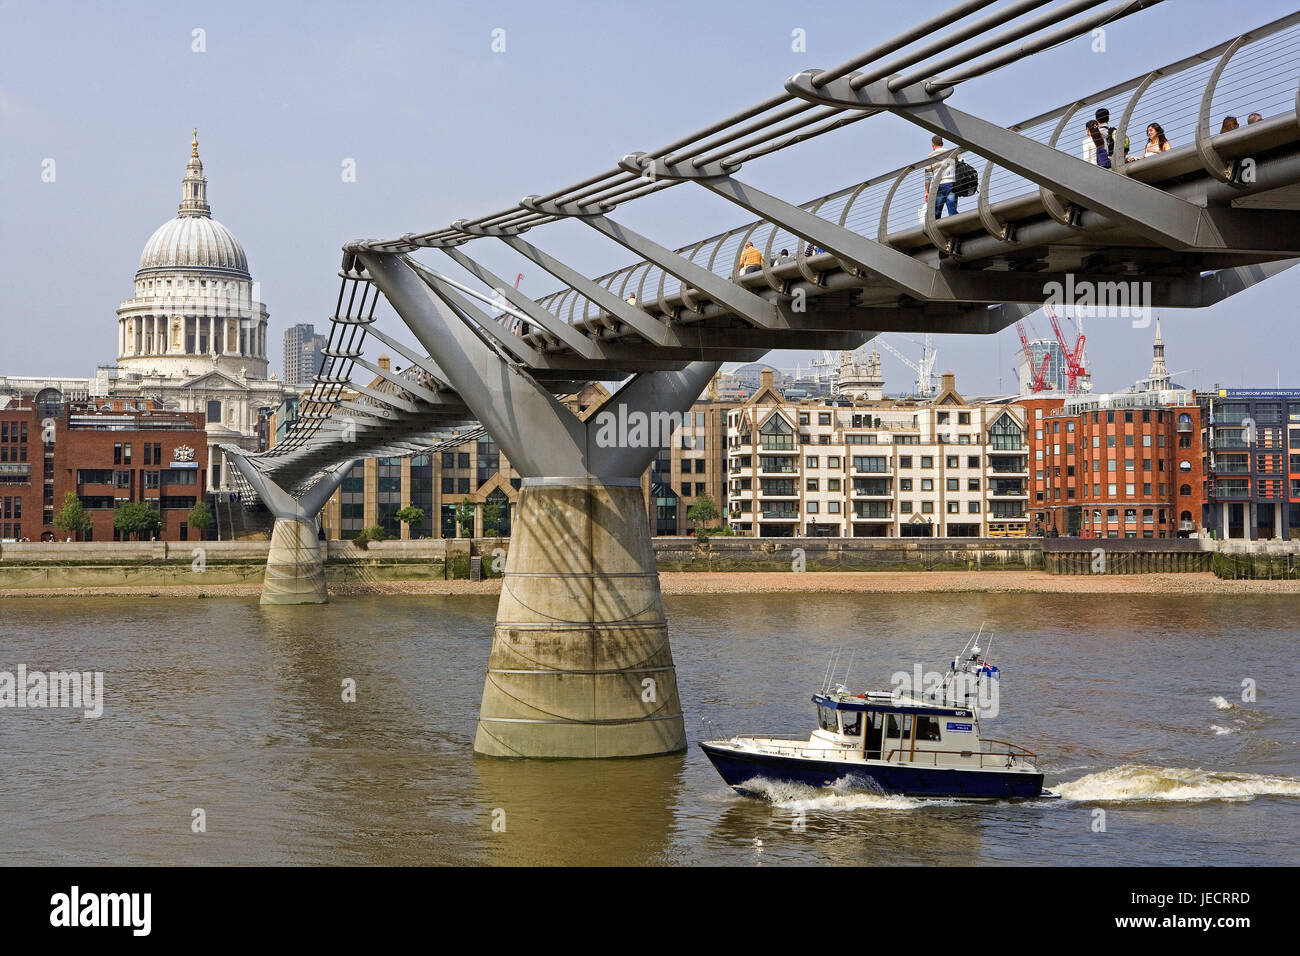 Great Britain, England, London, millennium Bridge, background, Cathedral of St Paul, capital, the Thames, boat, bridge, footbridge, person, town stroll, sightseeing, cathedral, church, architecture, place of interest, tourism, destination, Stock Photo